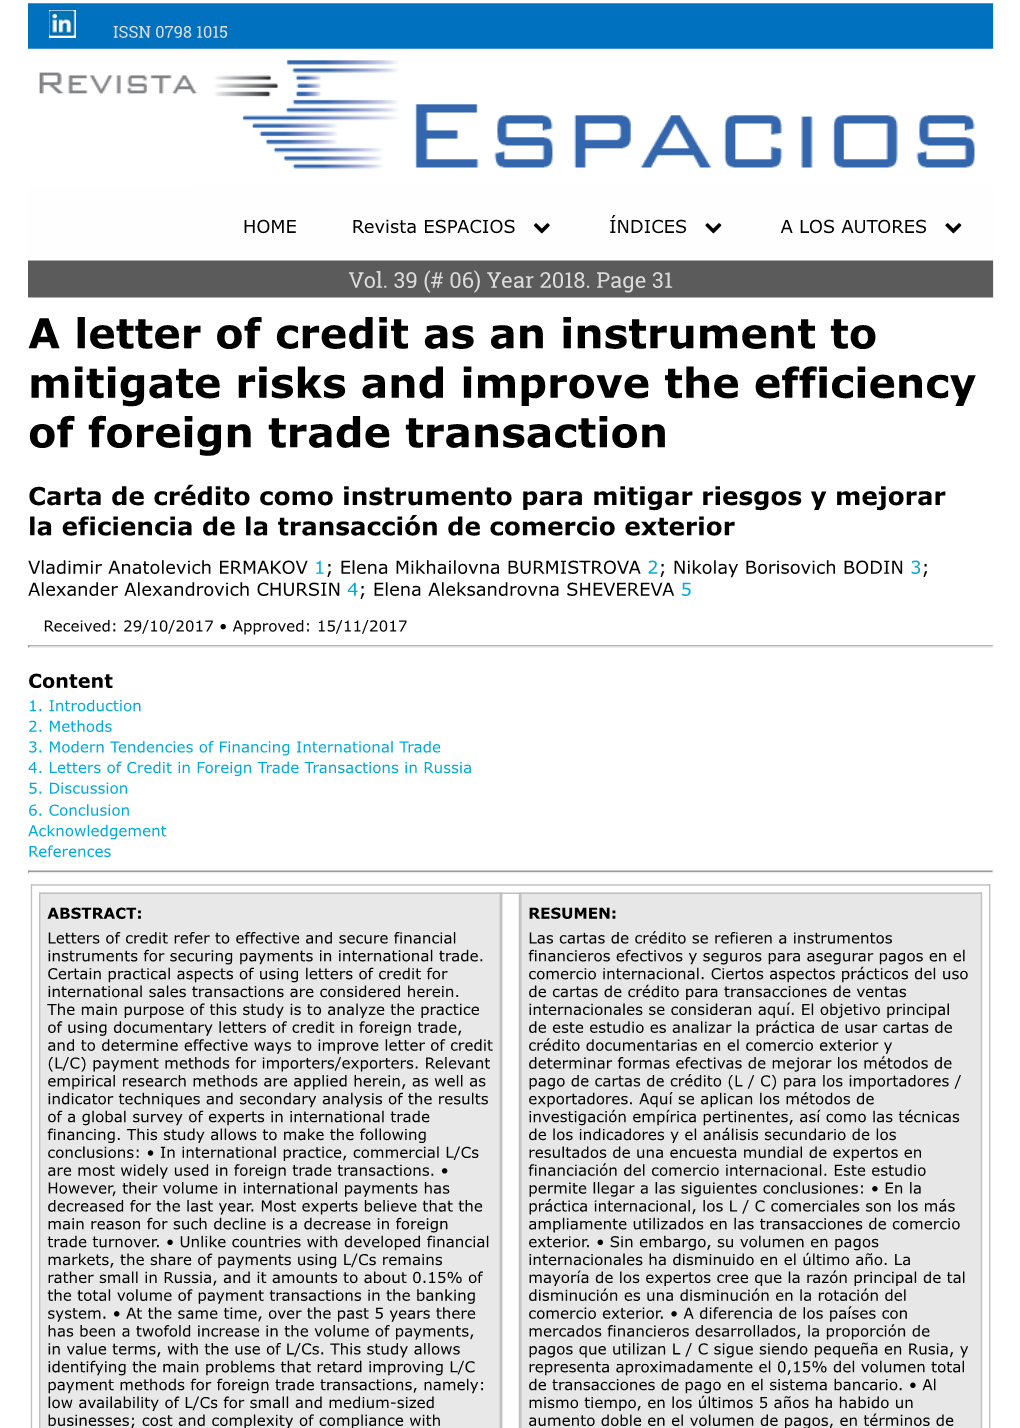 A Letter of Credit As an Instrument to Mitigate Risks and Improve the Efficiency of Foreign Trade Transaction